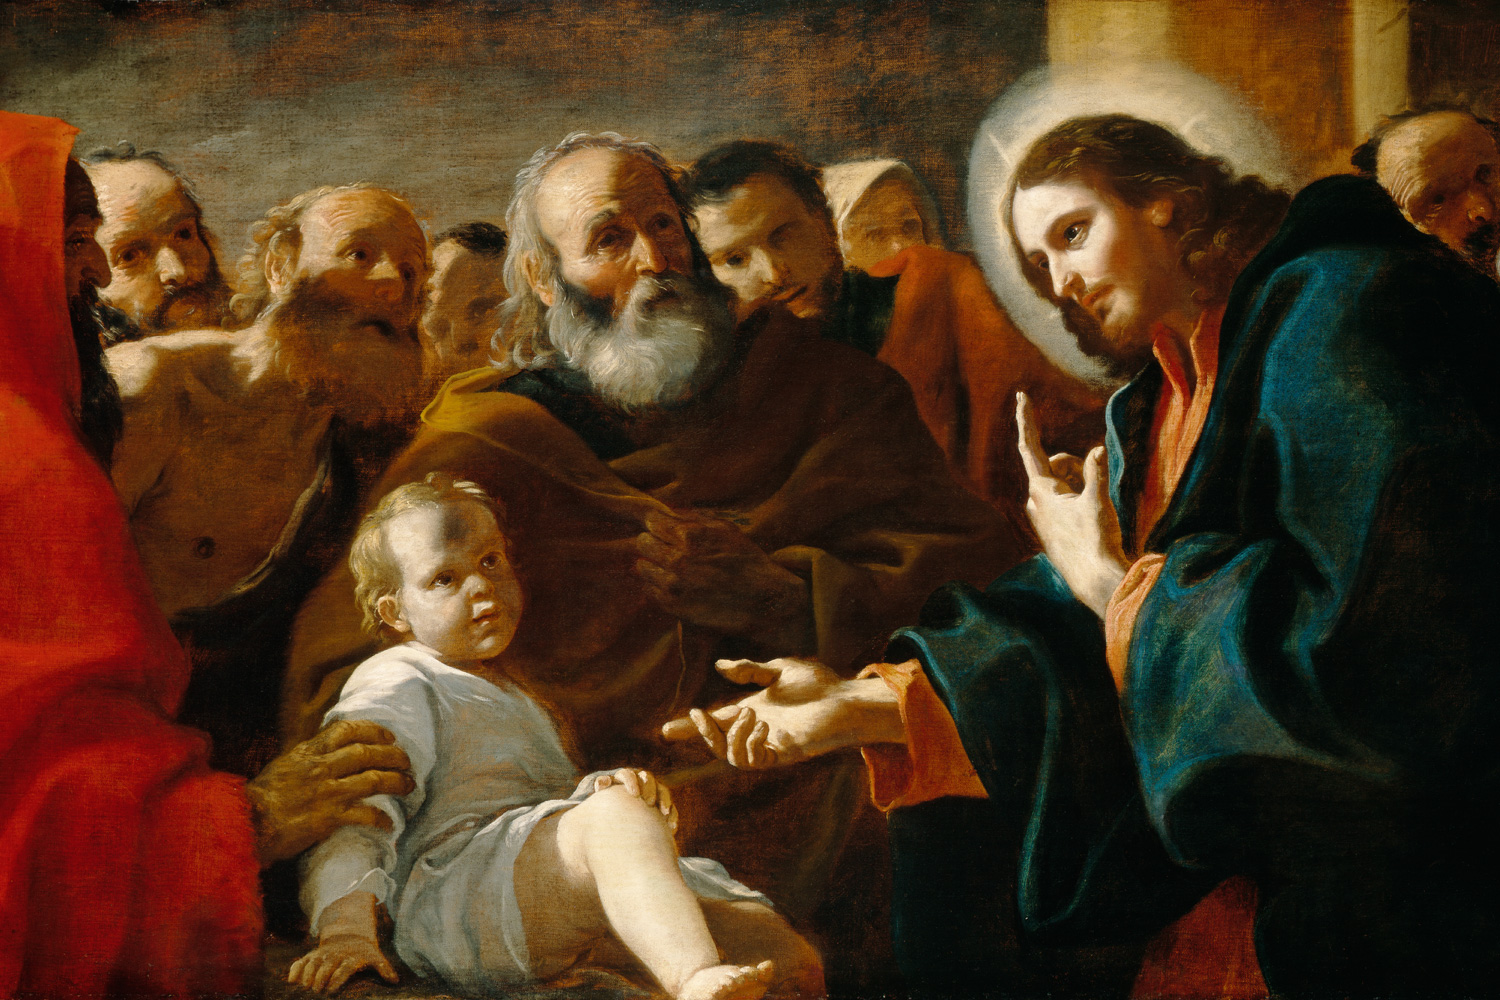 Christ Seats the Child in the MIdst of the Disciples, Mattia Preti, called Il Cavaliere Calabrese in M&G Collection